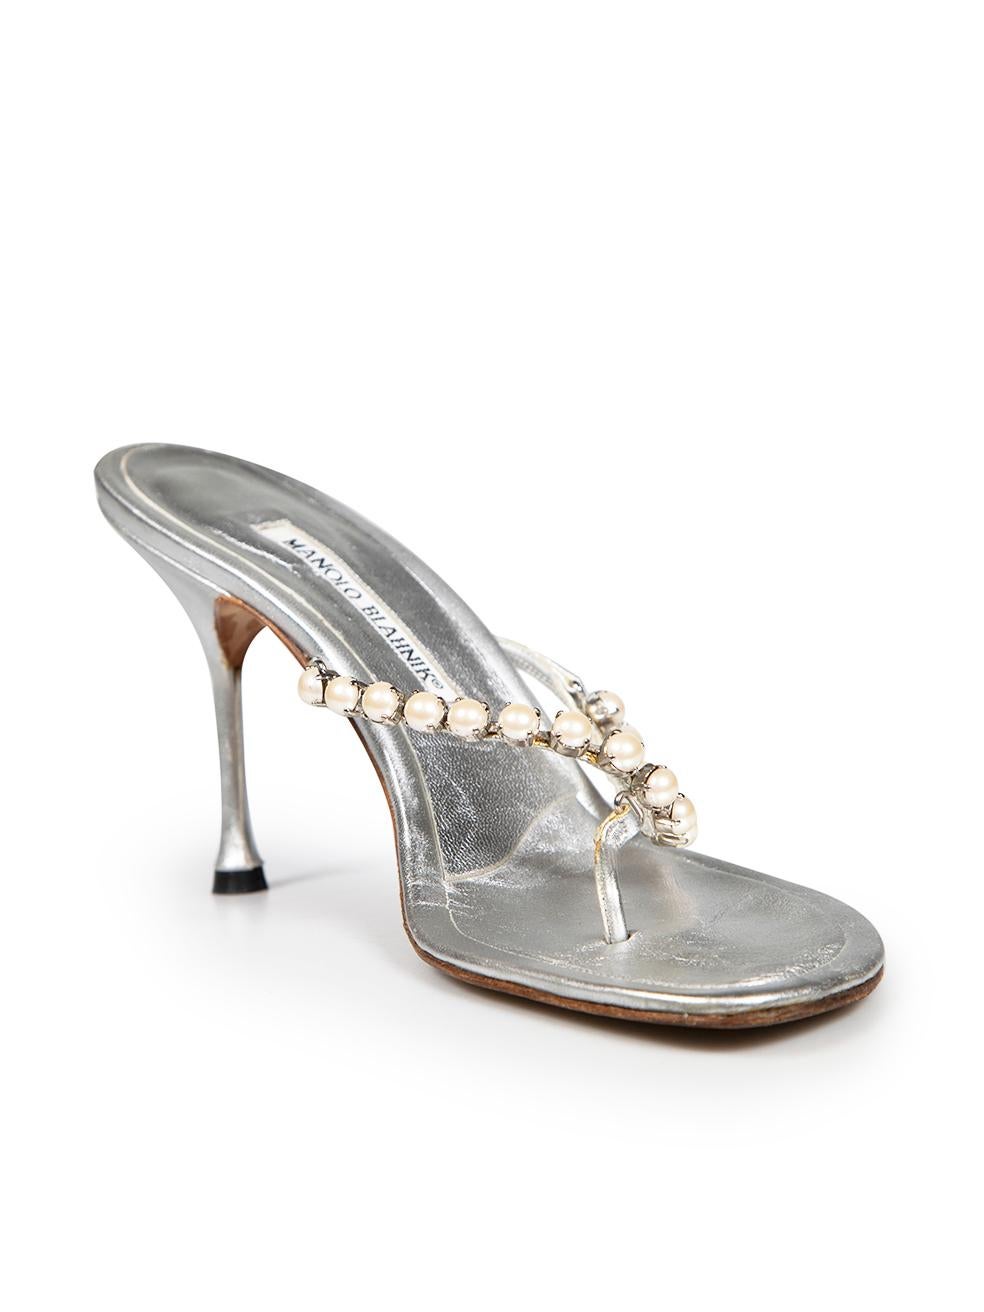 CONDITION is Good. Minor wear to shoes is evident. Light wear to both heels with small scuffs and scratches to the leather and scratches on the pearl embellishments on this used Manolo Blahnik designer resale item.
 
 Details
 Silver
 Leather
